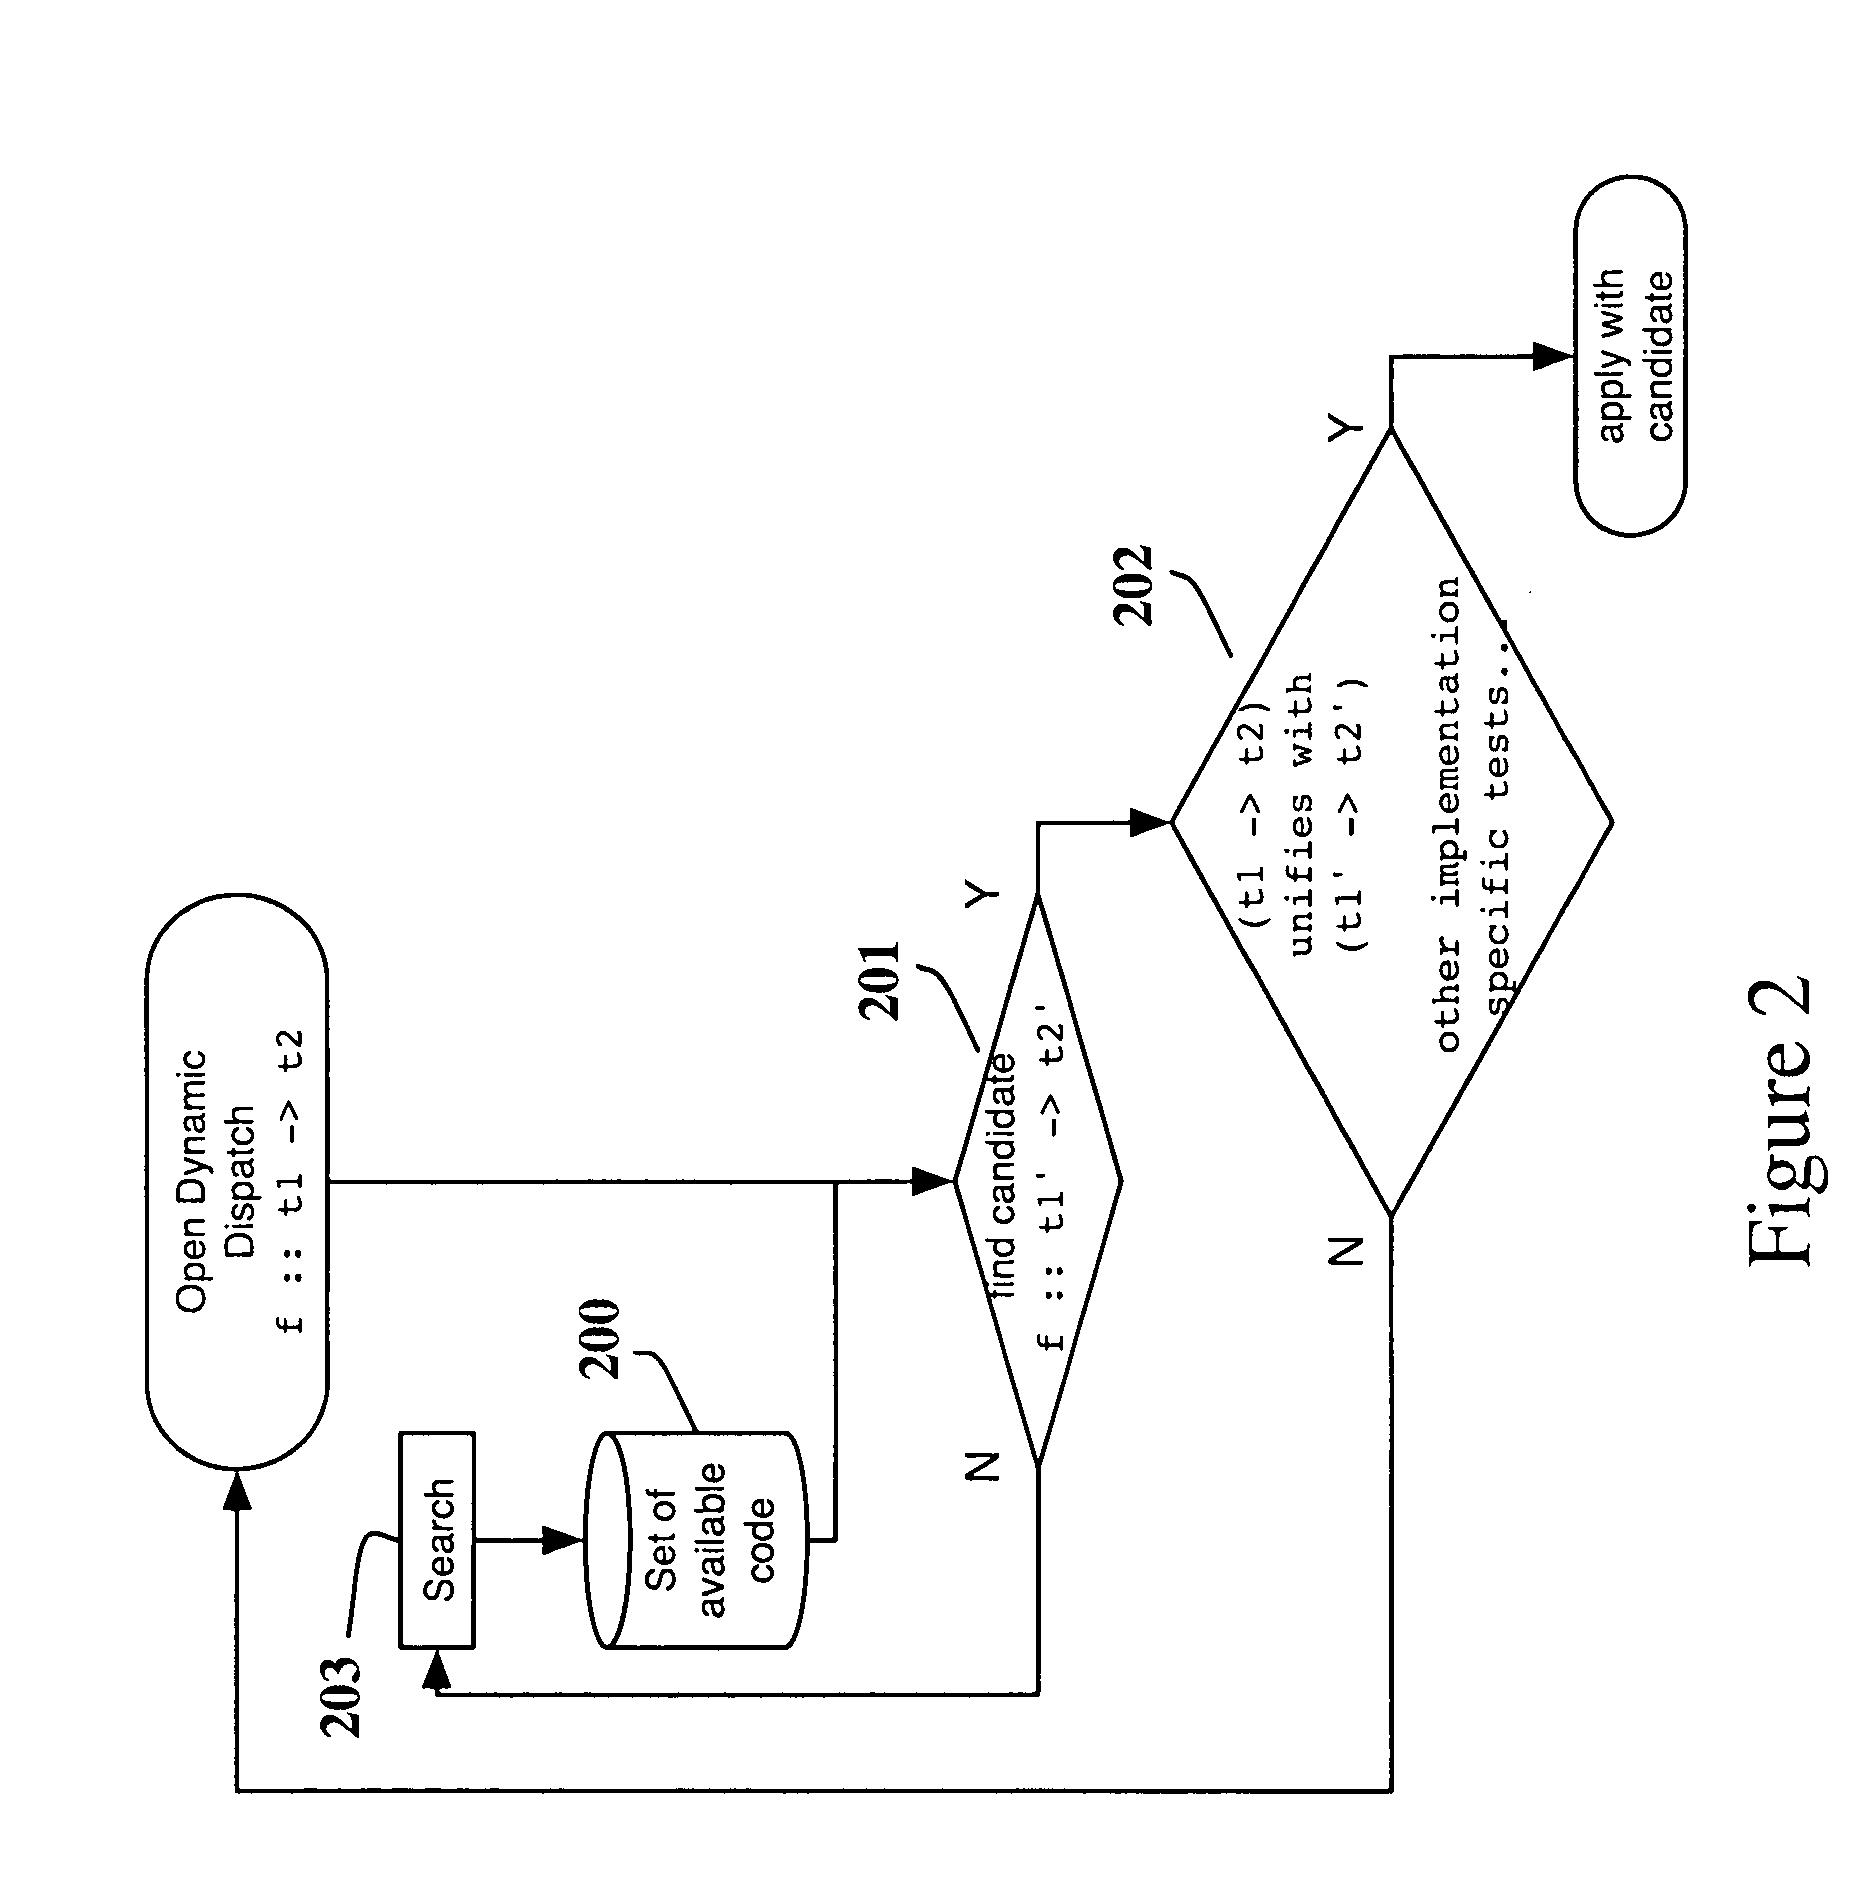 Circuits and methods for mobility of effectful program fragments